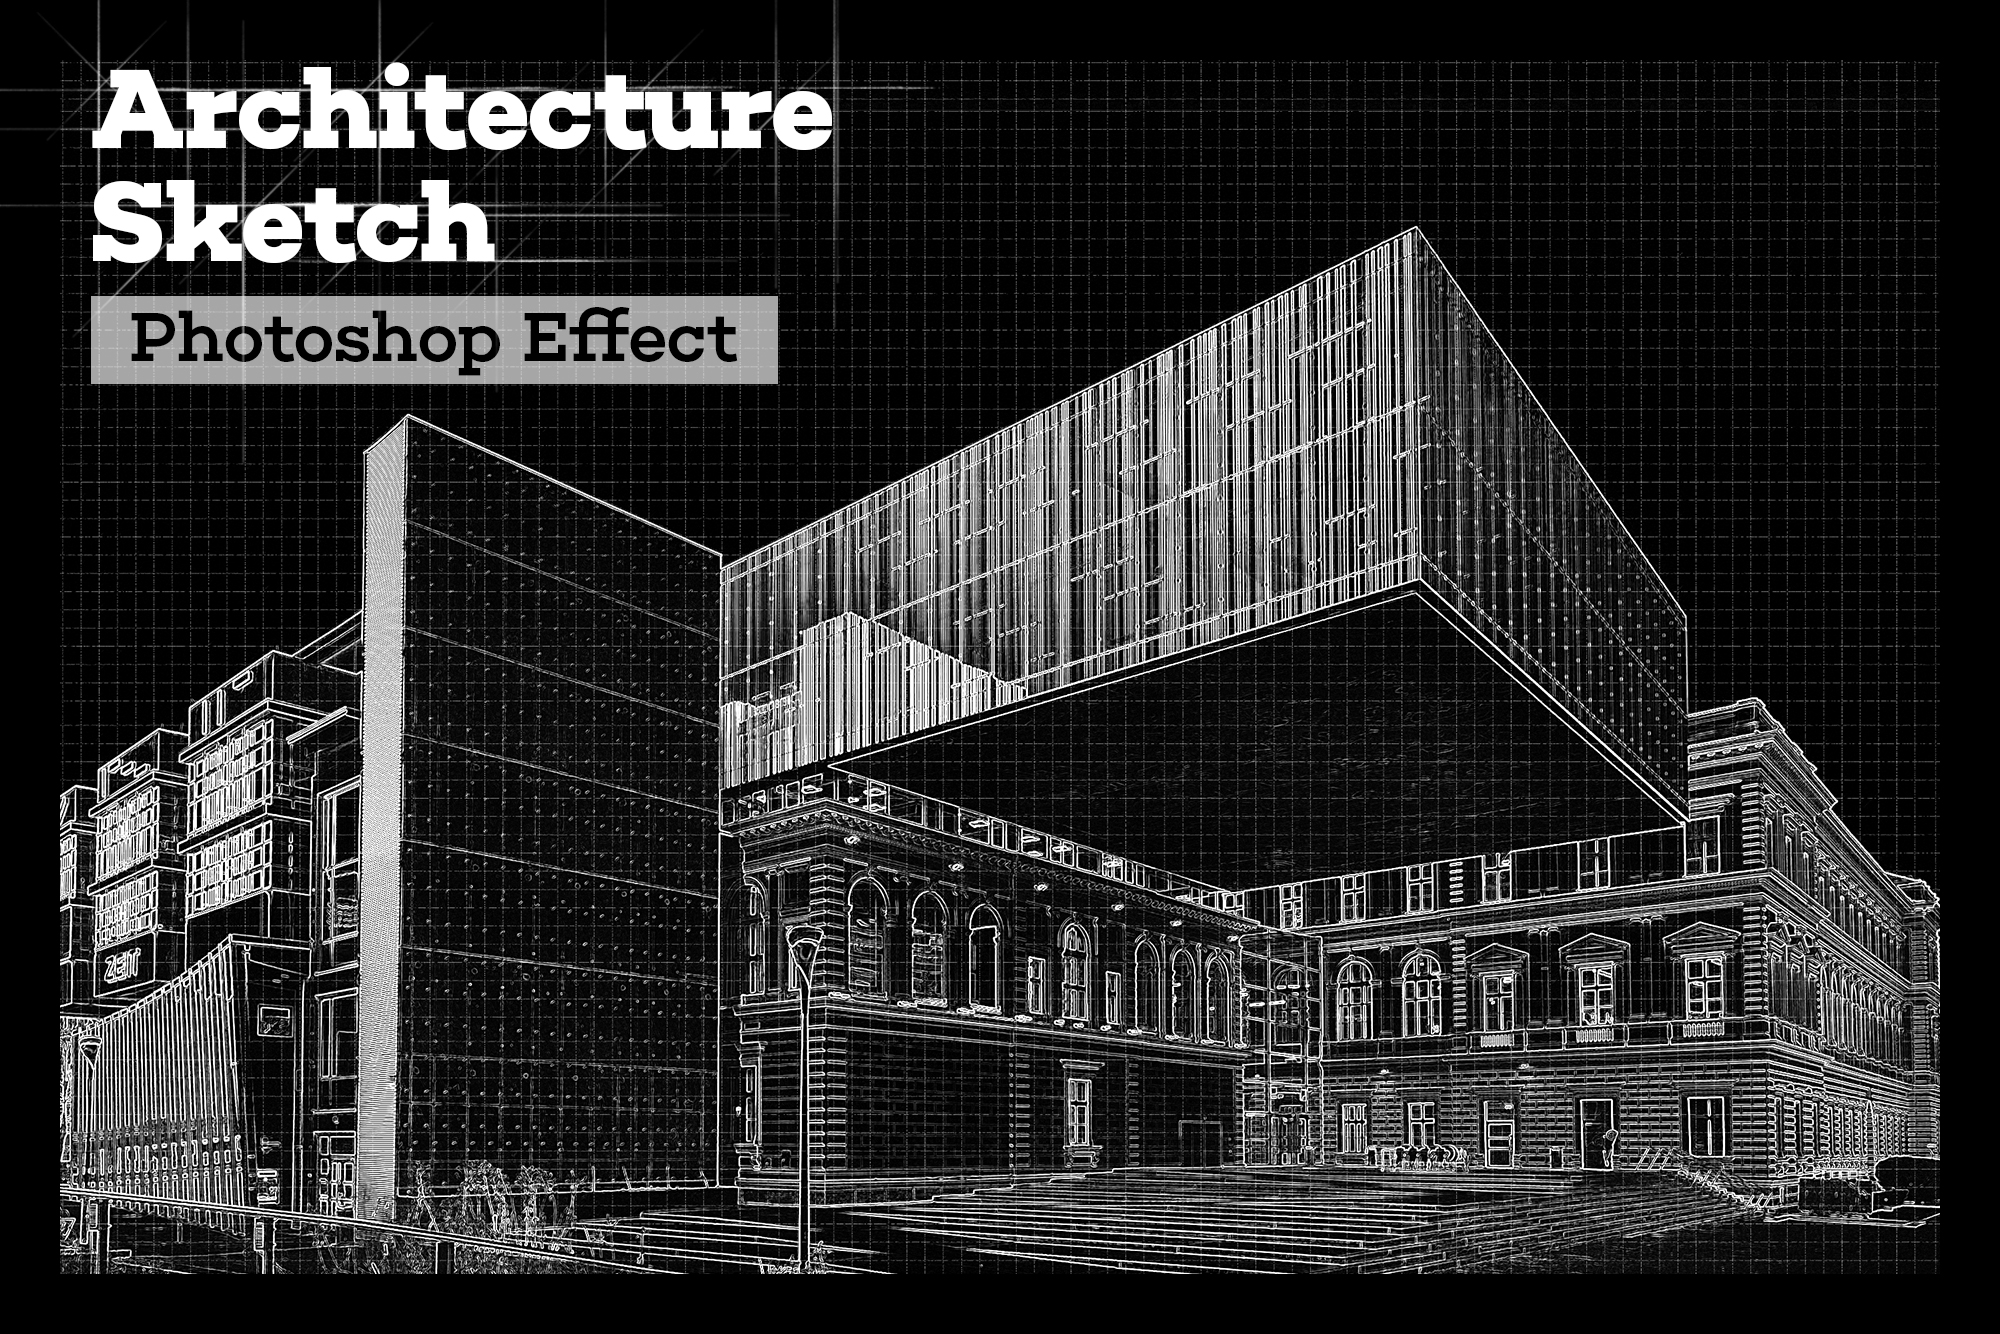 Item 10 AI Architecture Sketch Photoshop Actions by sparklestock  shared  by G4Ds